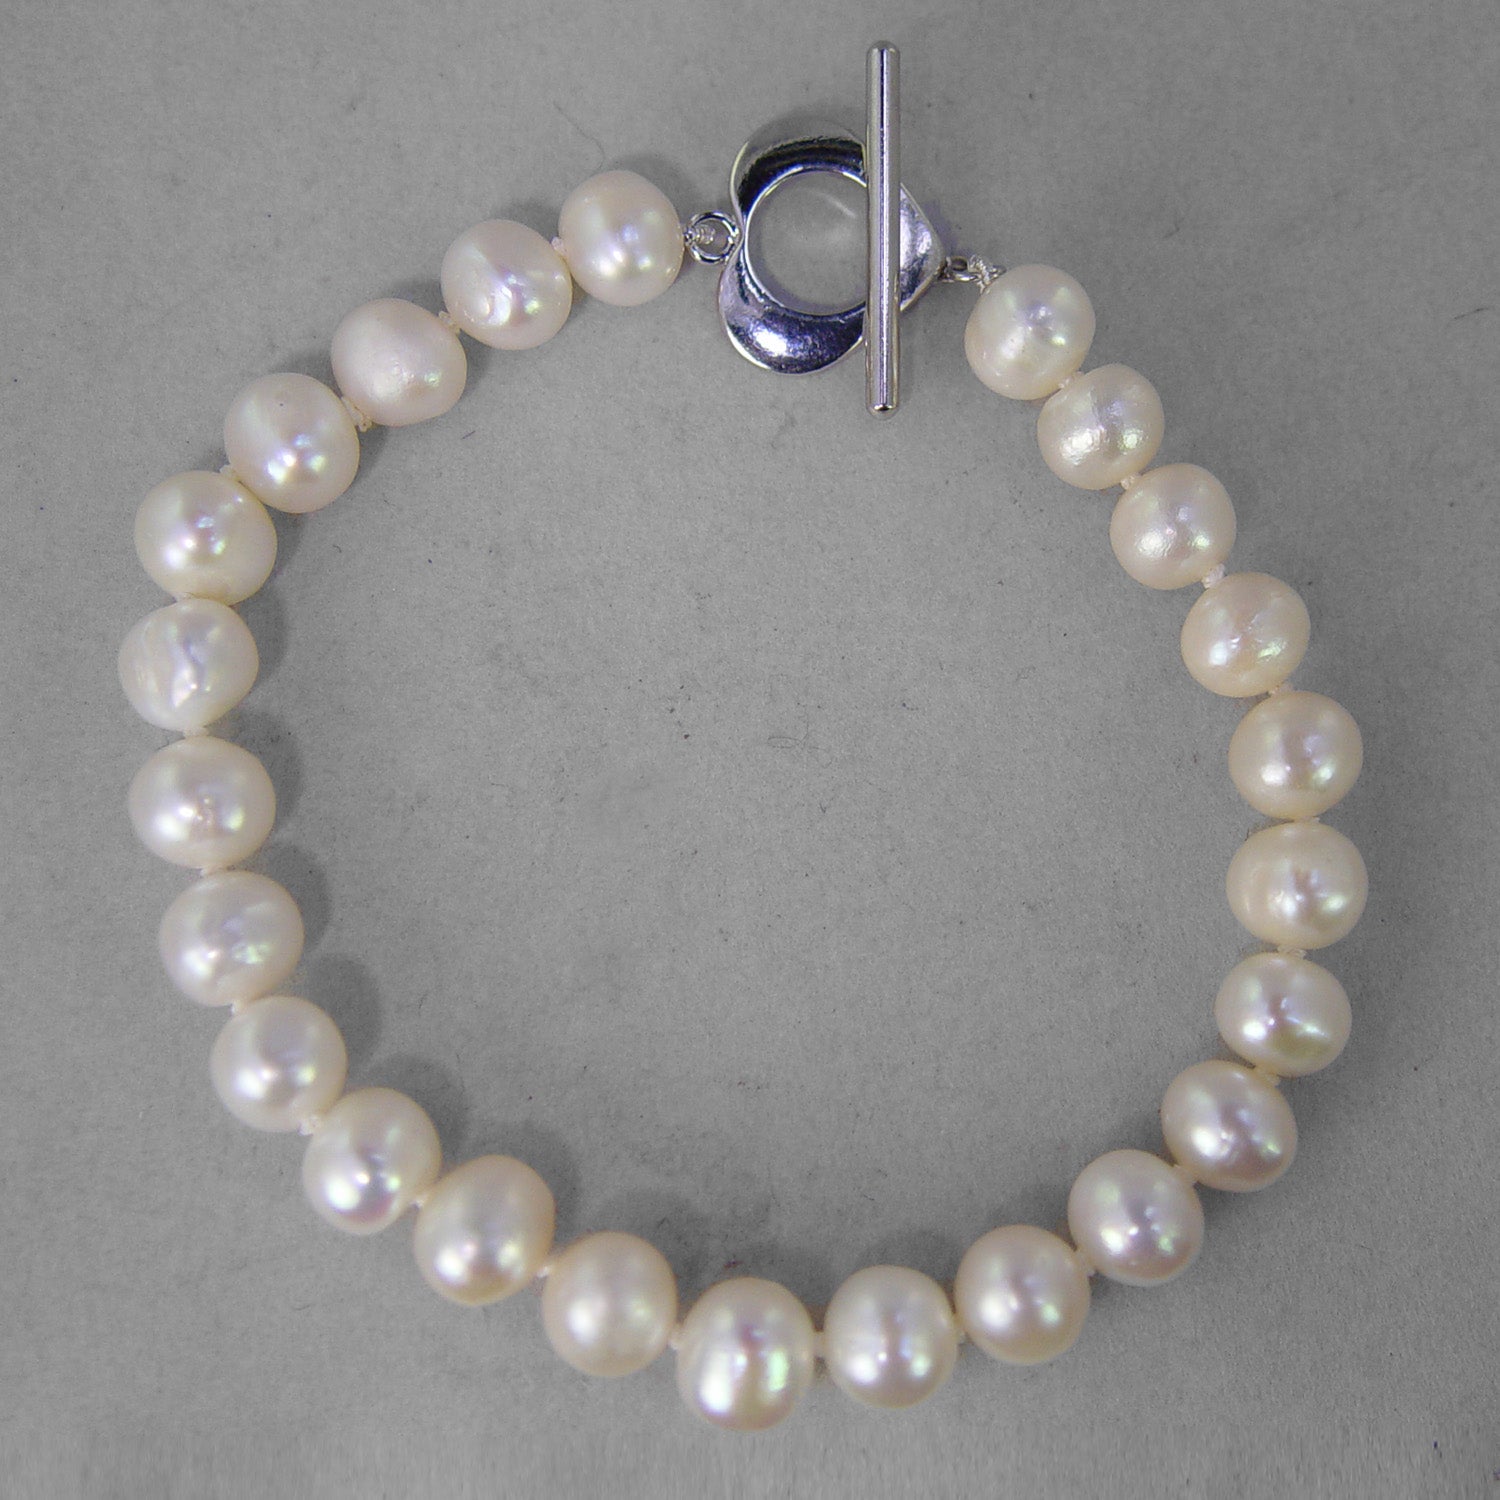 Pearl 7-8 mm Semi Round Knotted 7 1/4" Bracelet